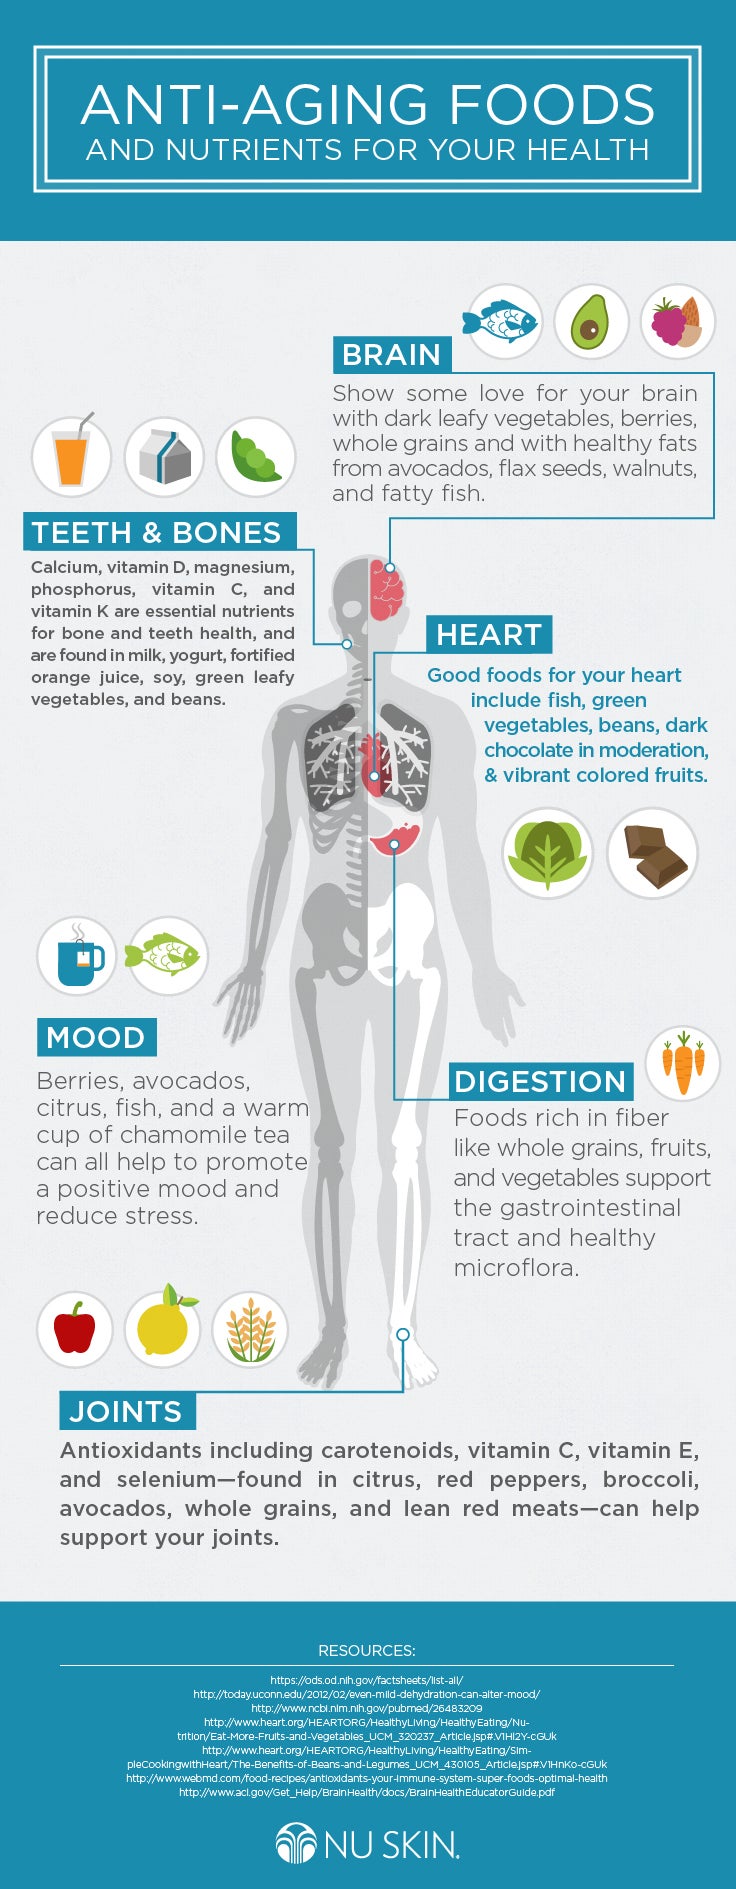 Anti-Aging Foods Infographic